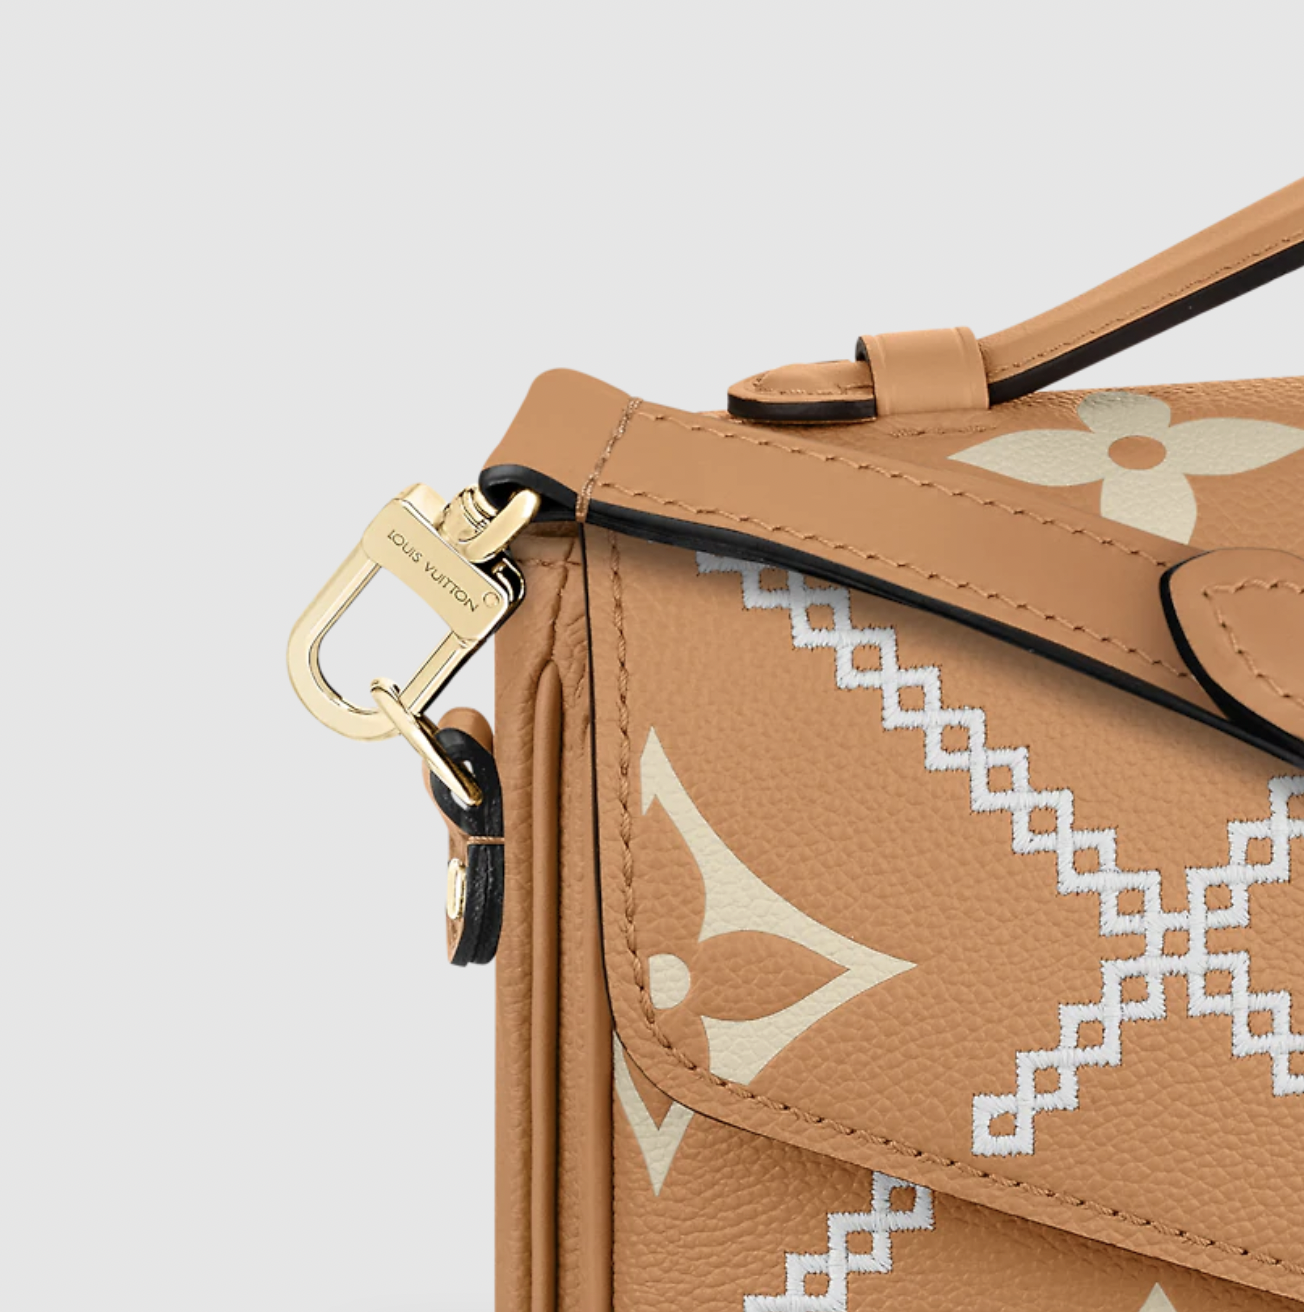 MICRO POCHETTE METIS  Specs and Thoughts on New Louis Vuitton Bag for 2022  